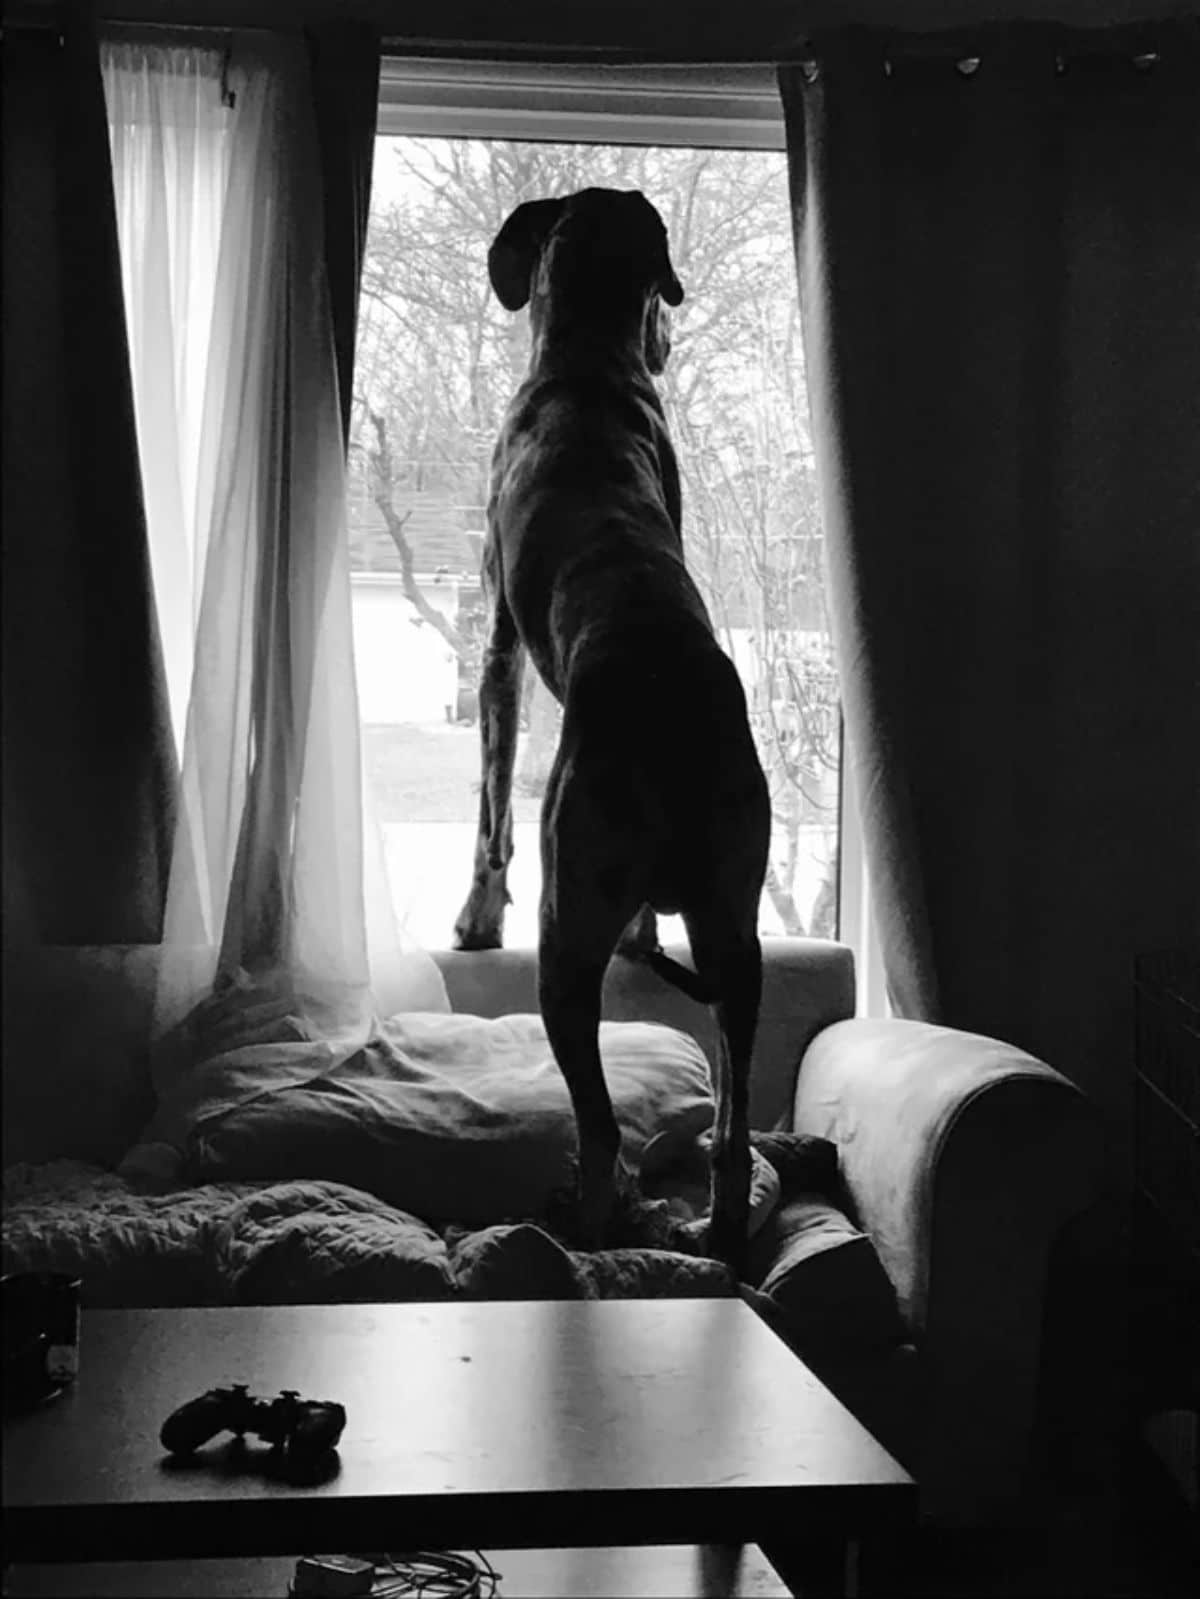 black and white photos of a greta dane standing on hind legs on a couch looking out of a window